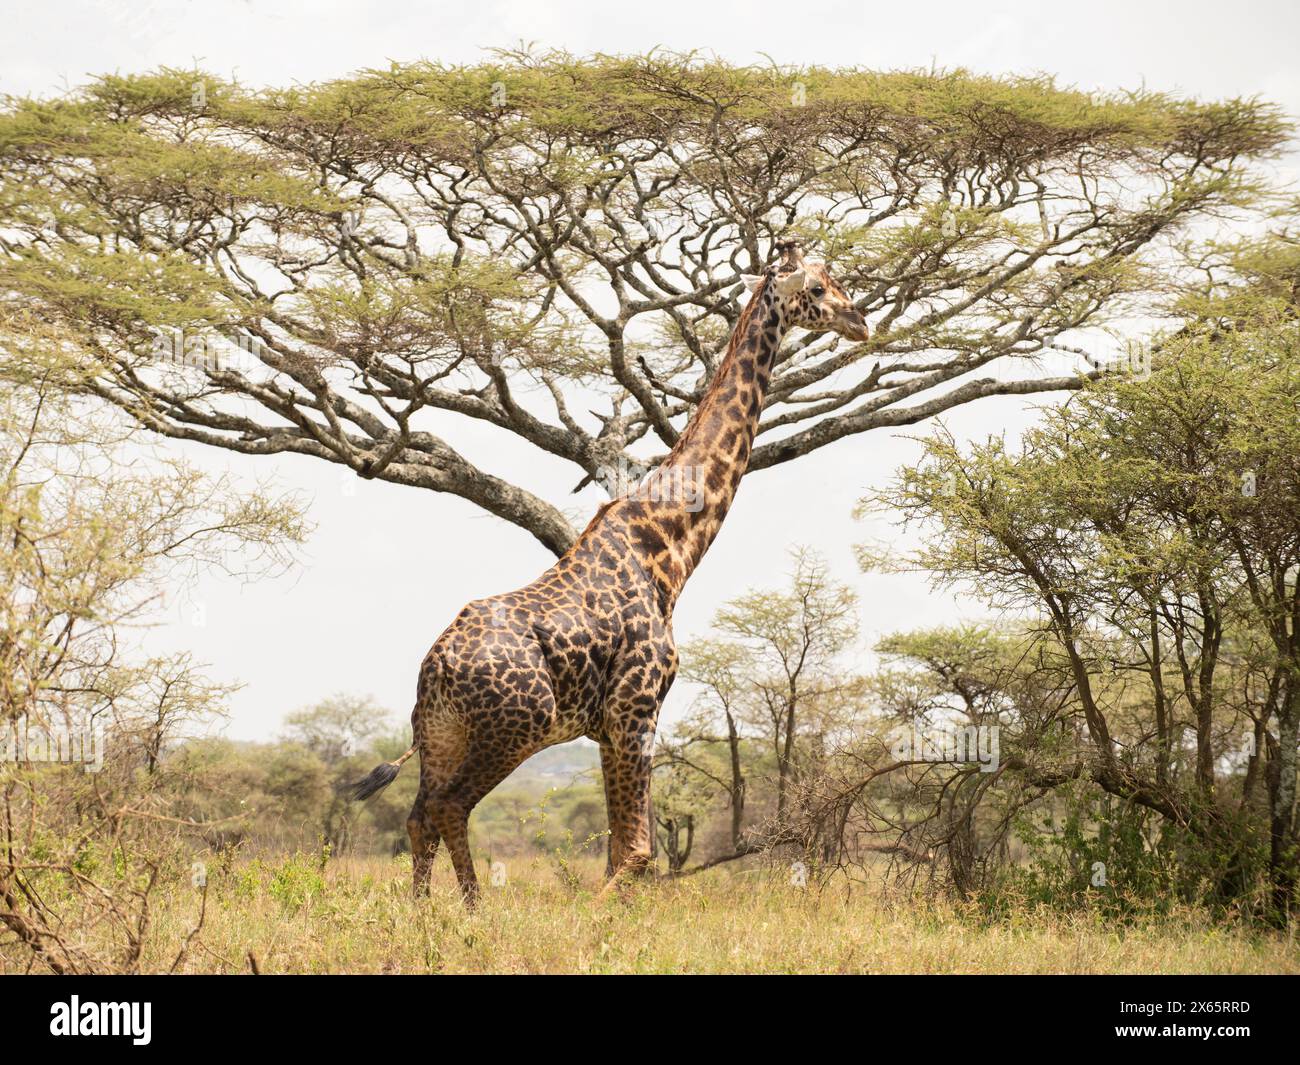 A giraffe feeds from a tall tree on a hot day in the Serengeti. Stock Photo